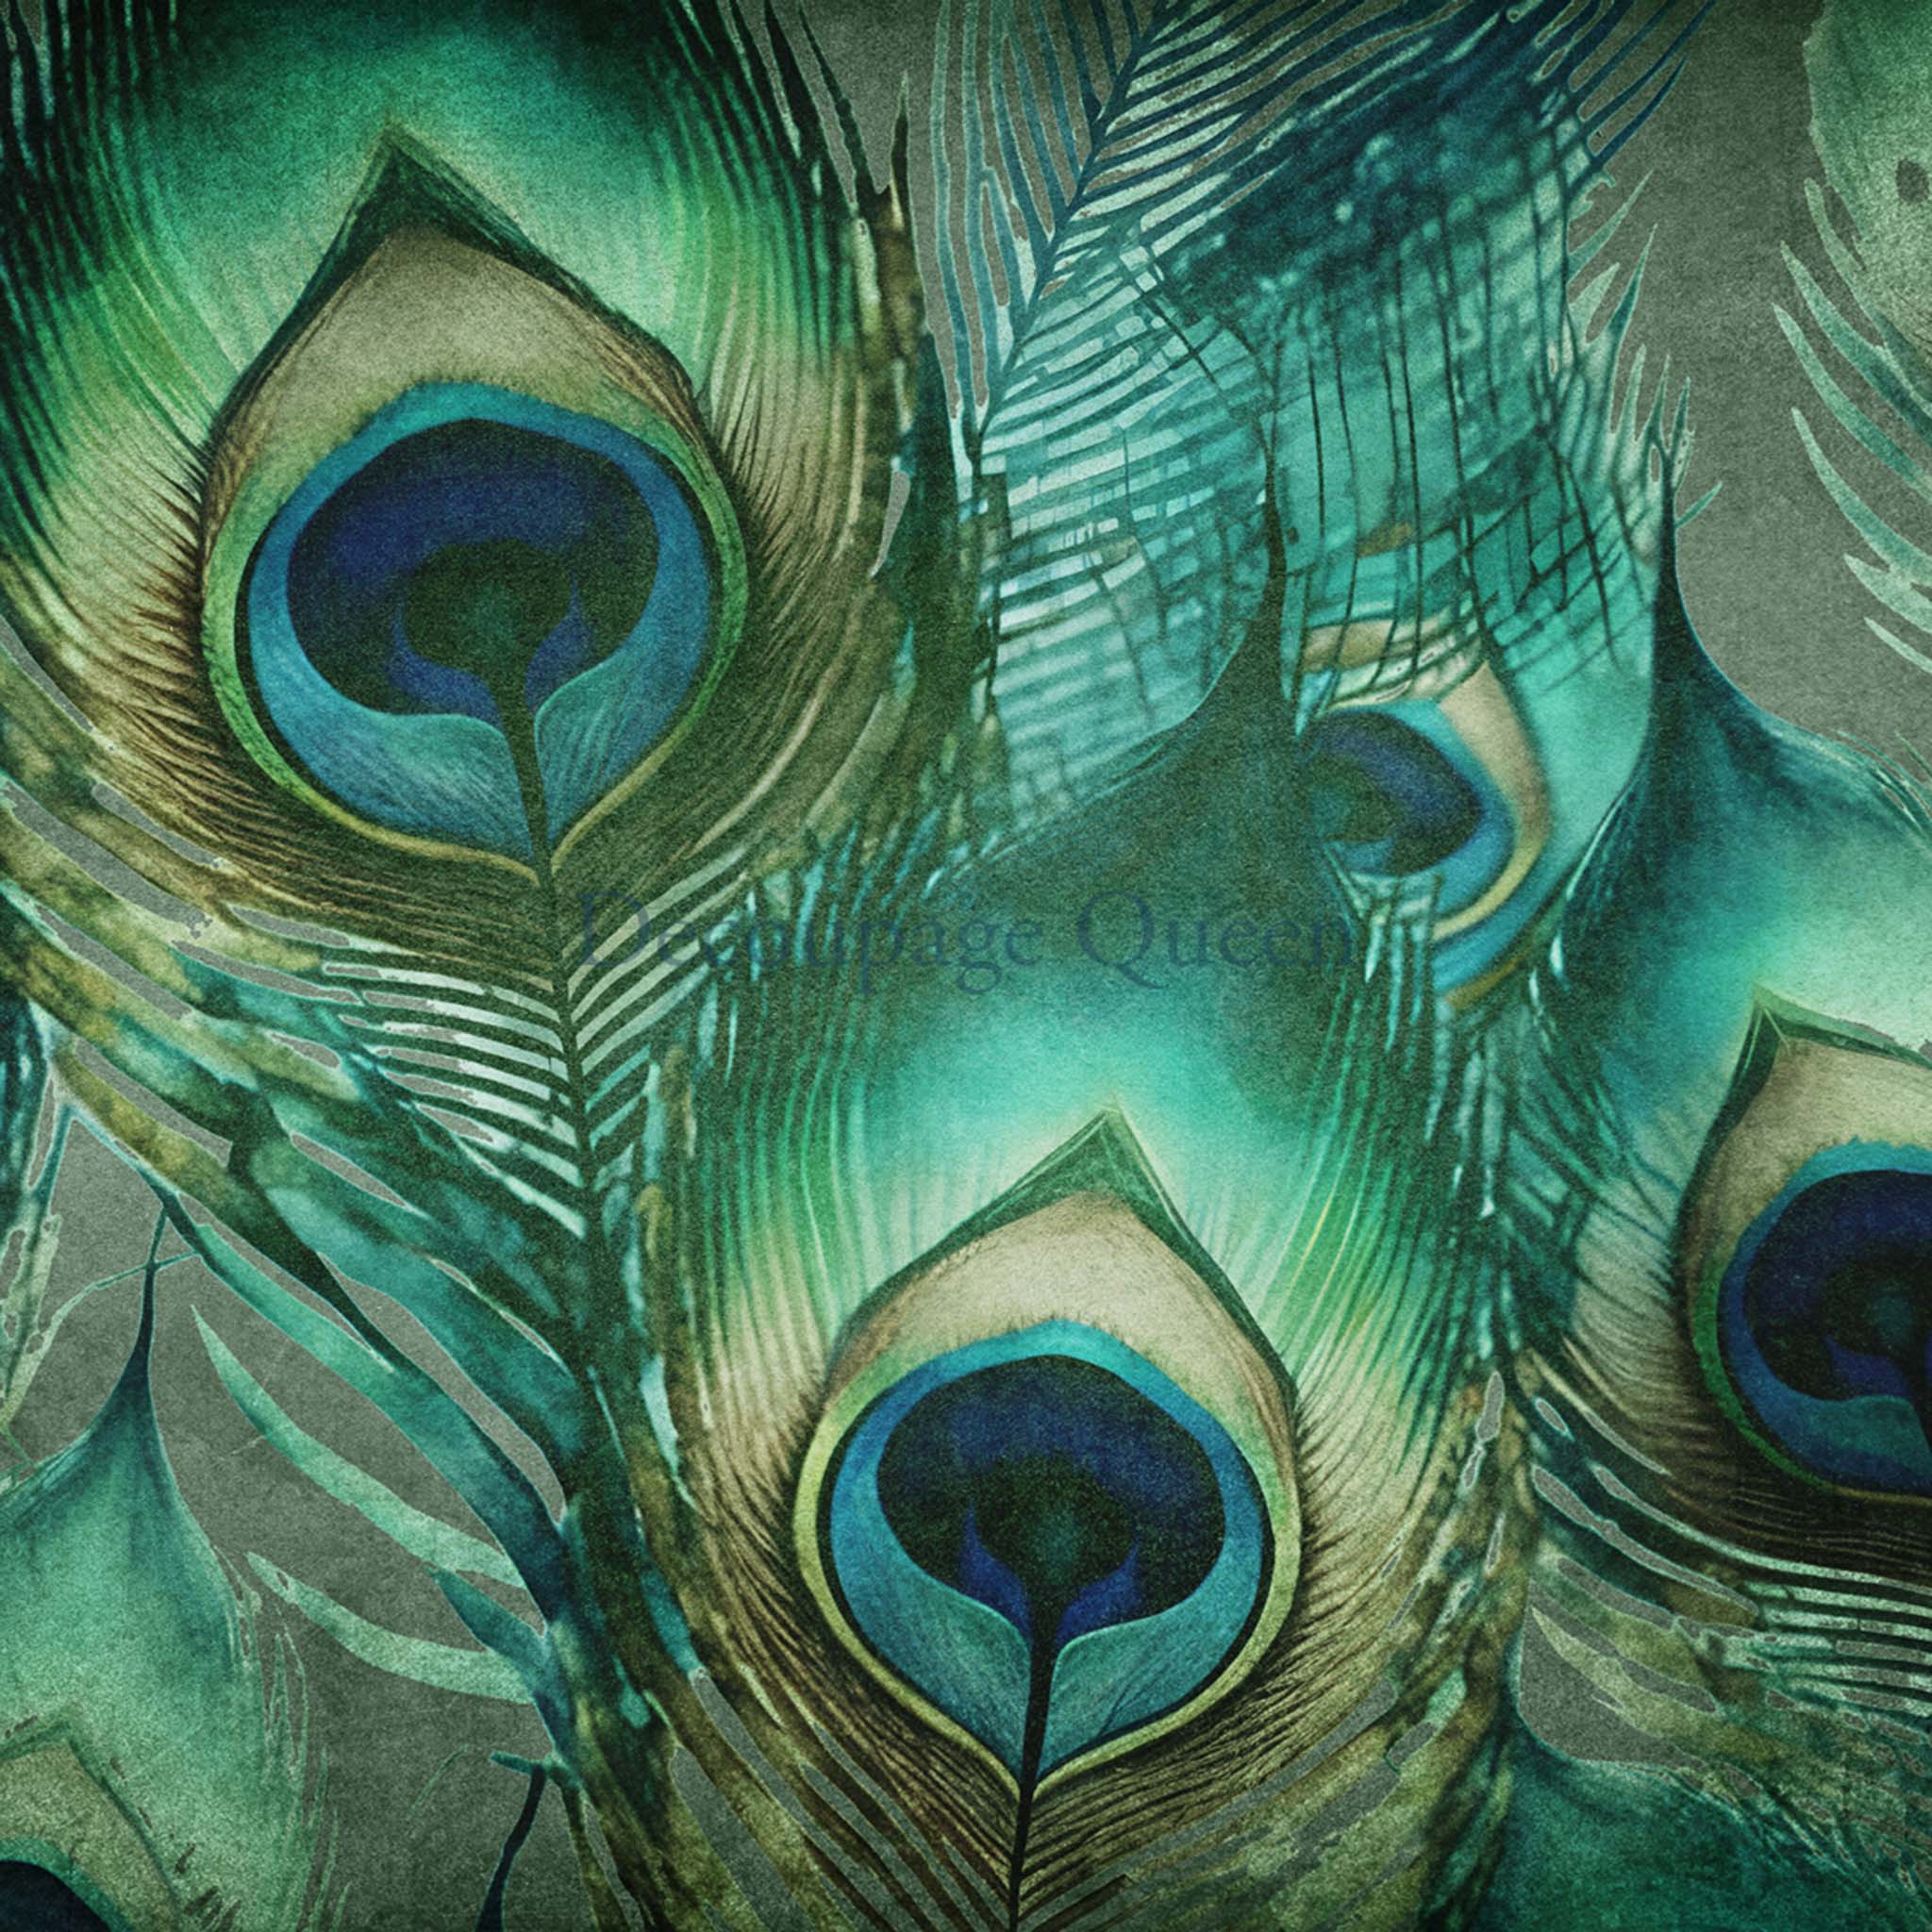 Close-up of an A0 rice paper design that features a close-up of peacock feathers in shades of jade, teal, and navy.